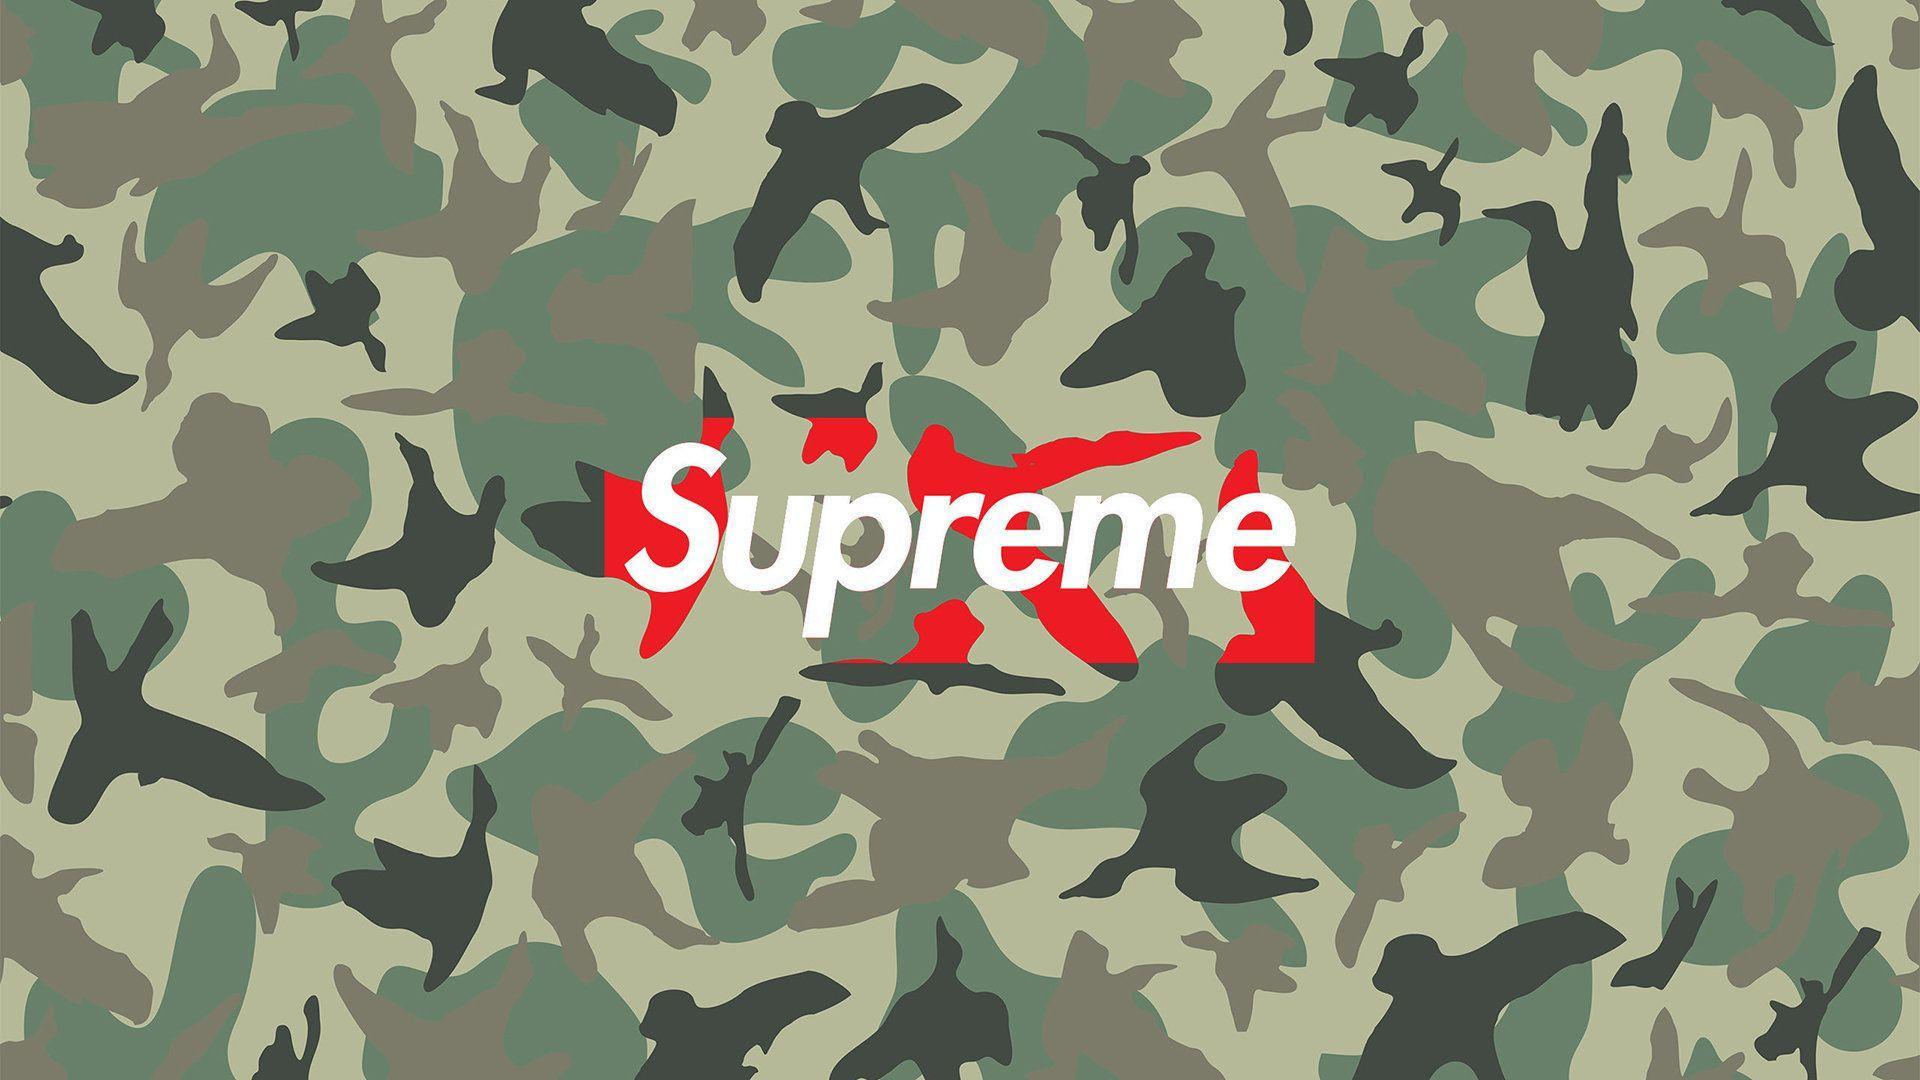 Supreme Hd Wallpapers Free Download, Supreme, Other